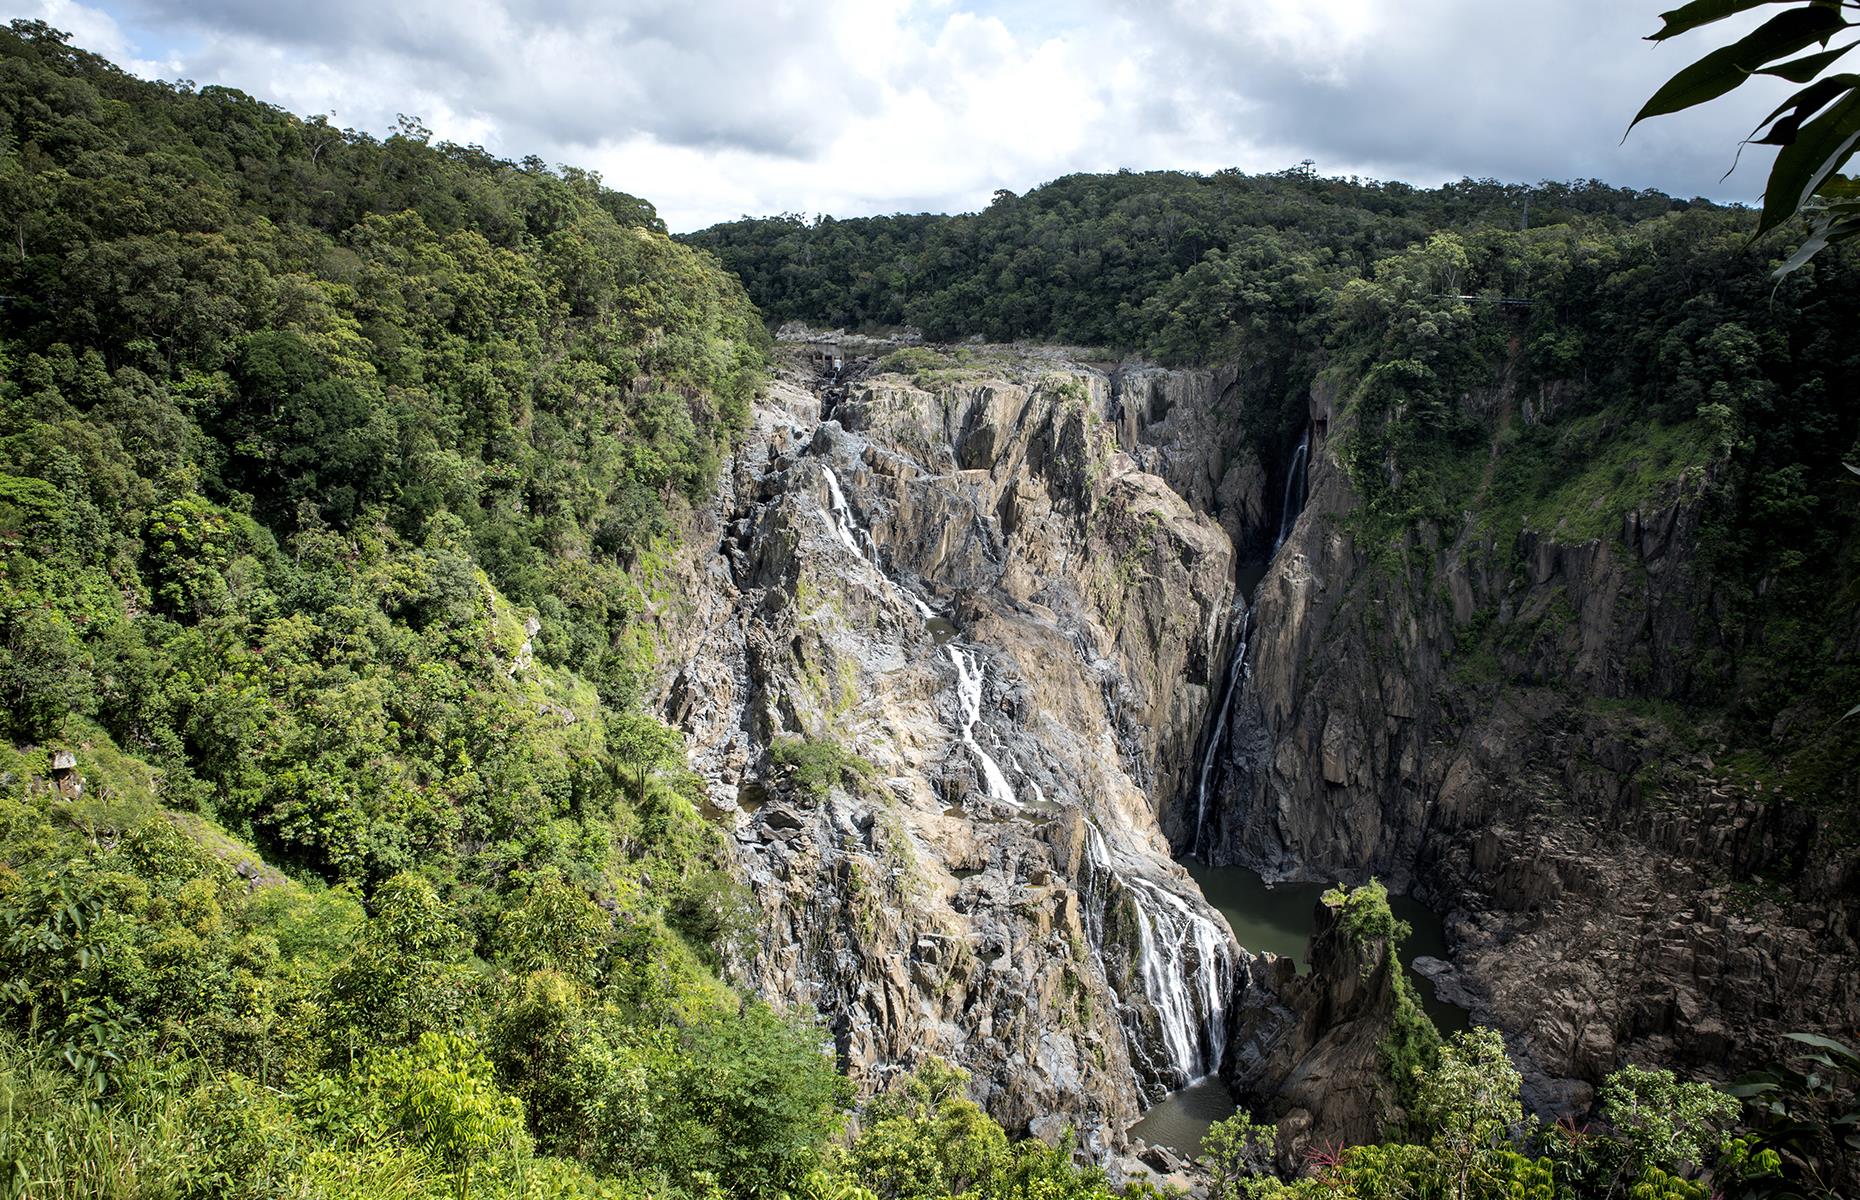 <p>Return fares start from $59 for adults and $29 for children. Many opt to take the railway to Kuranda and get the <a href="https://www.skyrail.com.au/">Skyrail Rainforest Cableway</a> back, to experience the World Heritage-listed Wet Tropics of Queensland from a different angle. A combined rail and cableway ticket costs £65 $89 for adults and $45 for children. There are <a href="https://www.ksr.com.au/Pages/COVID-19-Health-and-Hygiene.aspx">special COVID-19-related measures</a> in place.</p>